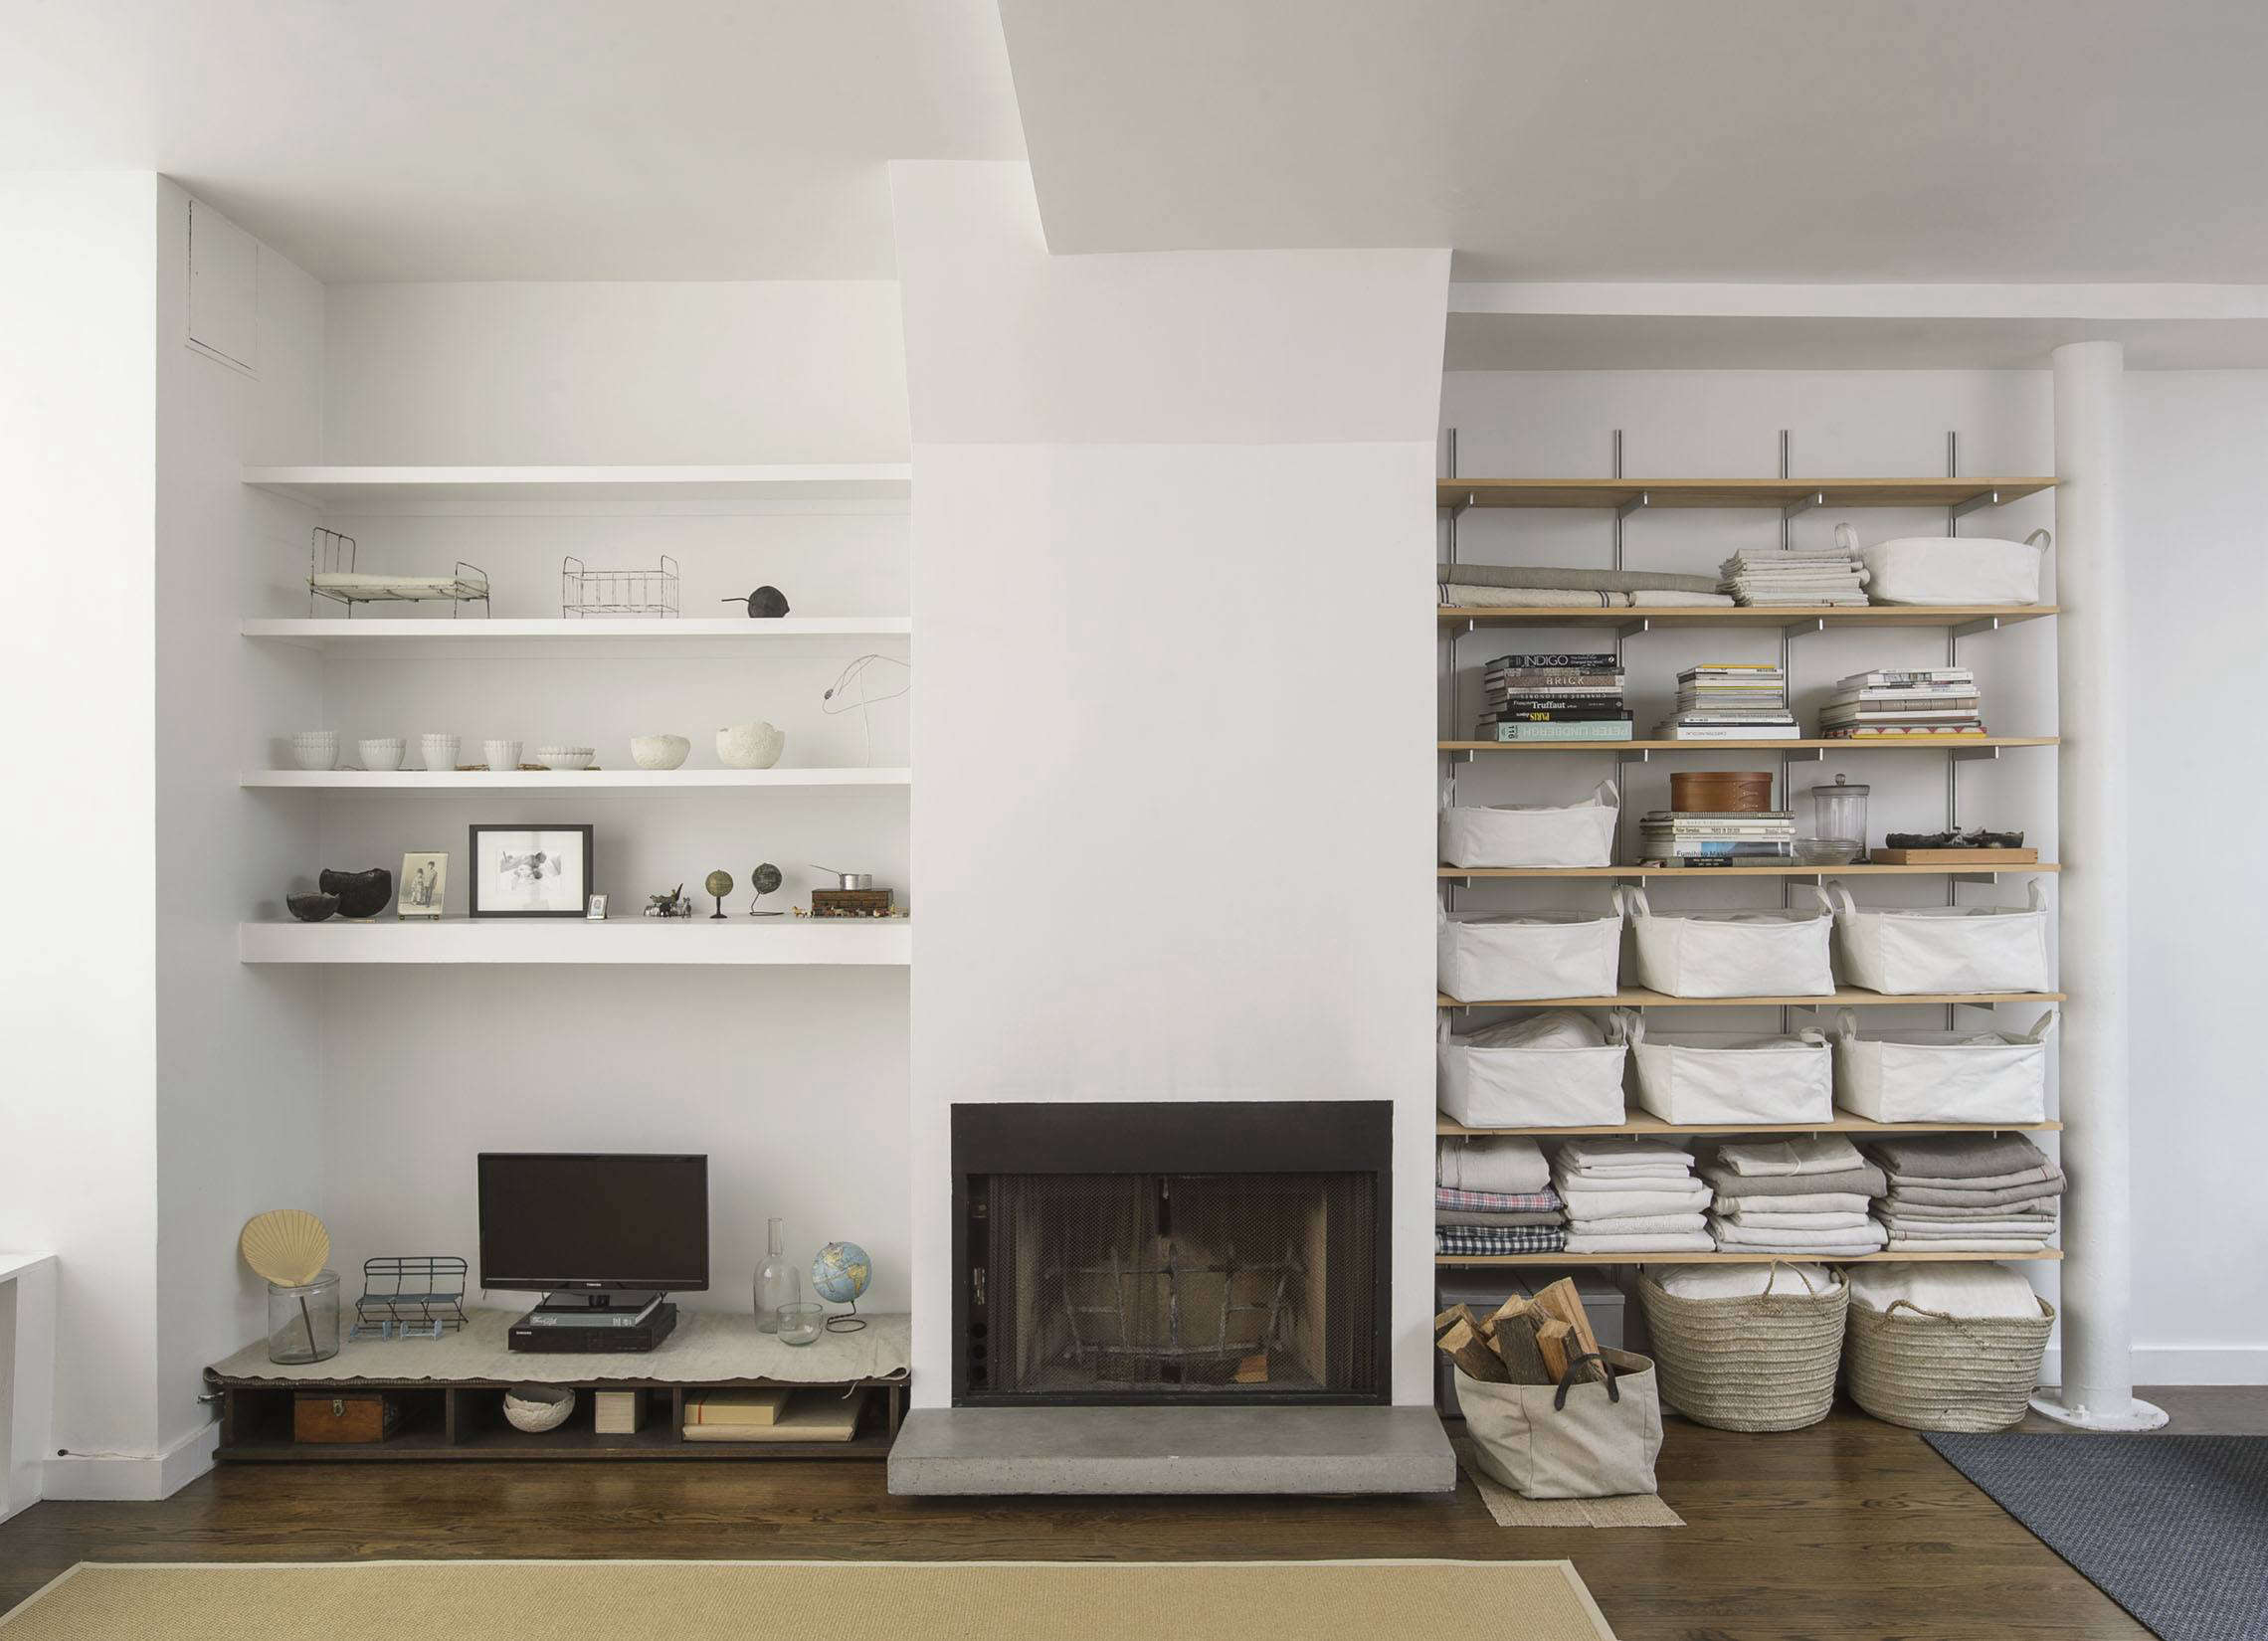 Warm Minimalism 10 of Our Favorite Contemporary Fireplaces from the Remodelista Archives portrait 4